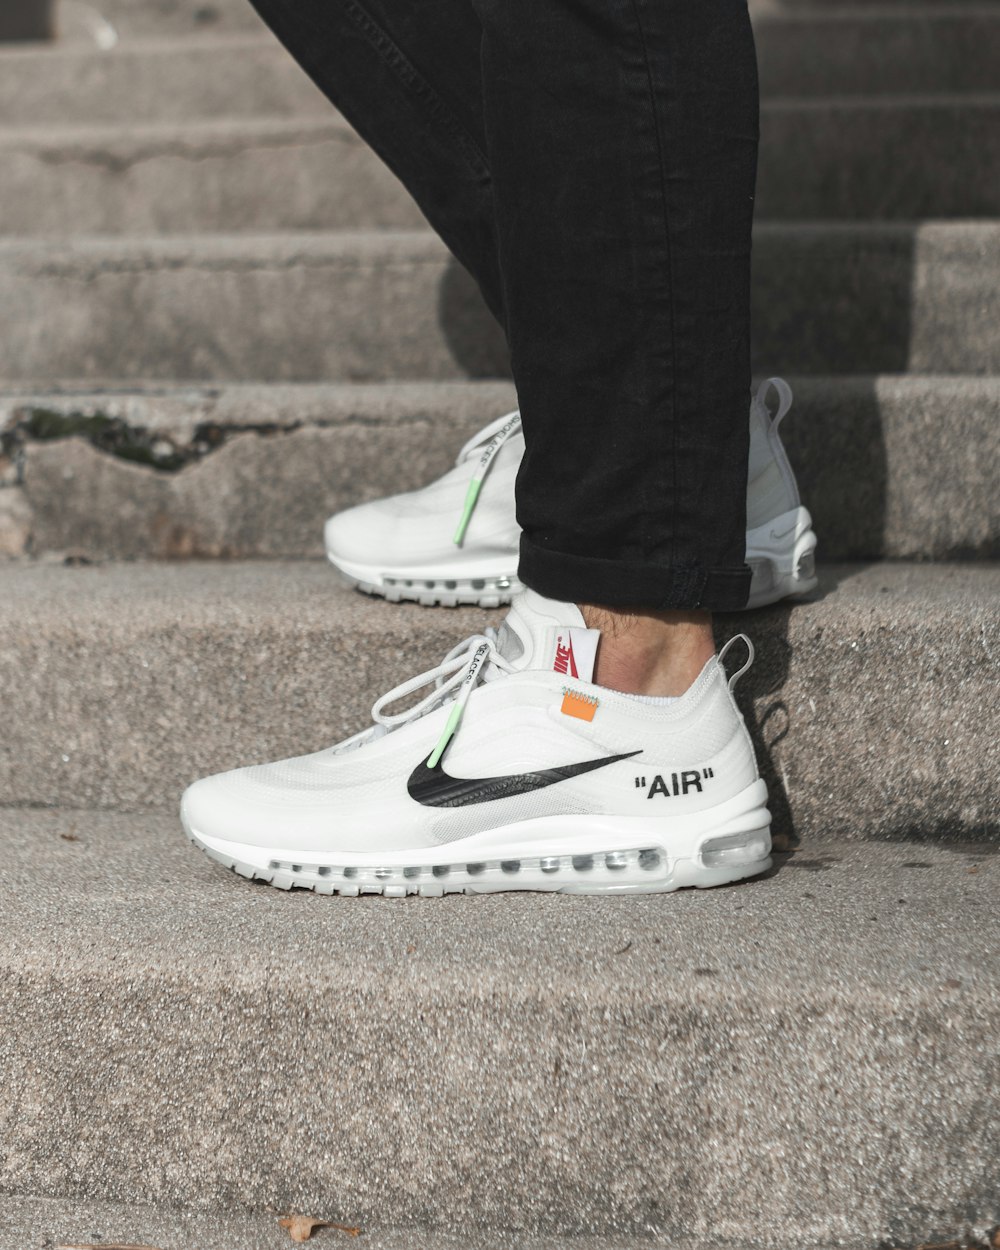 Nike Air Pictures | Download Free Images on Unsplash